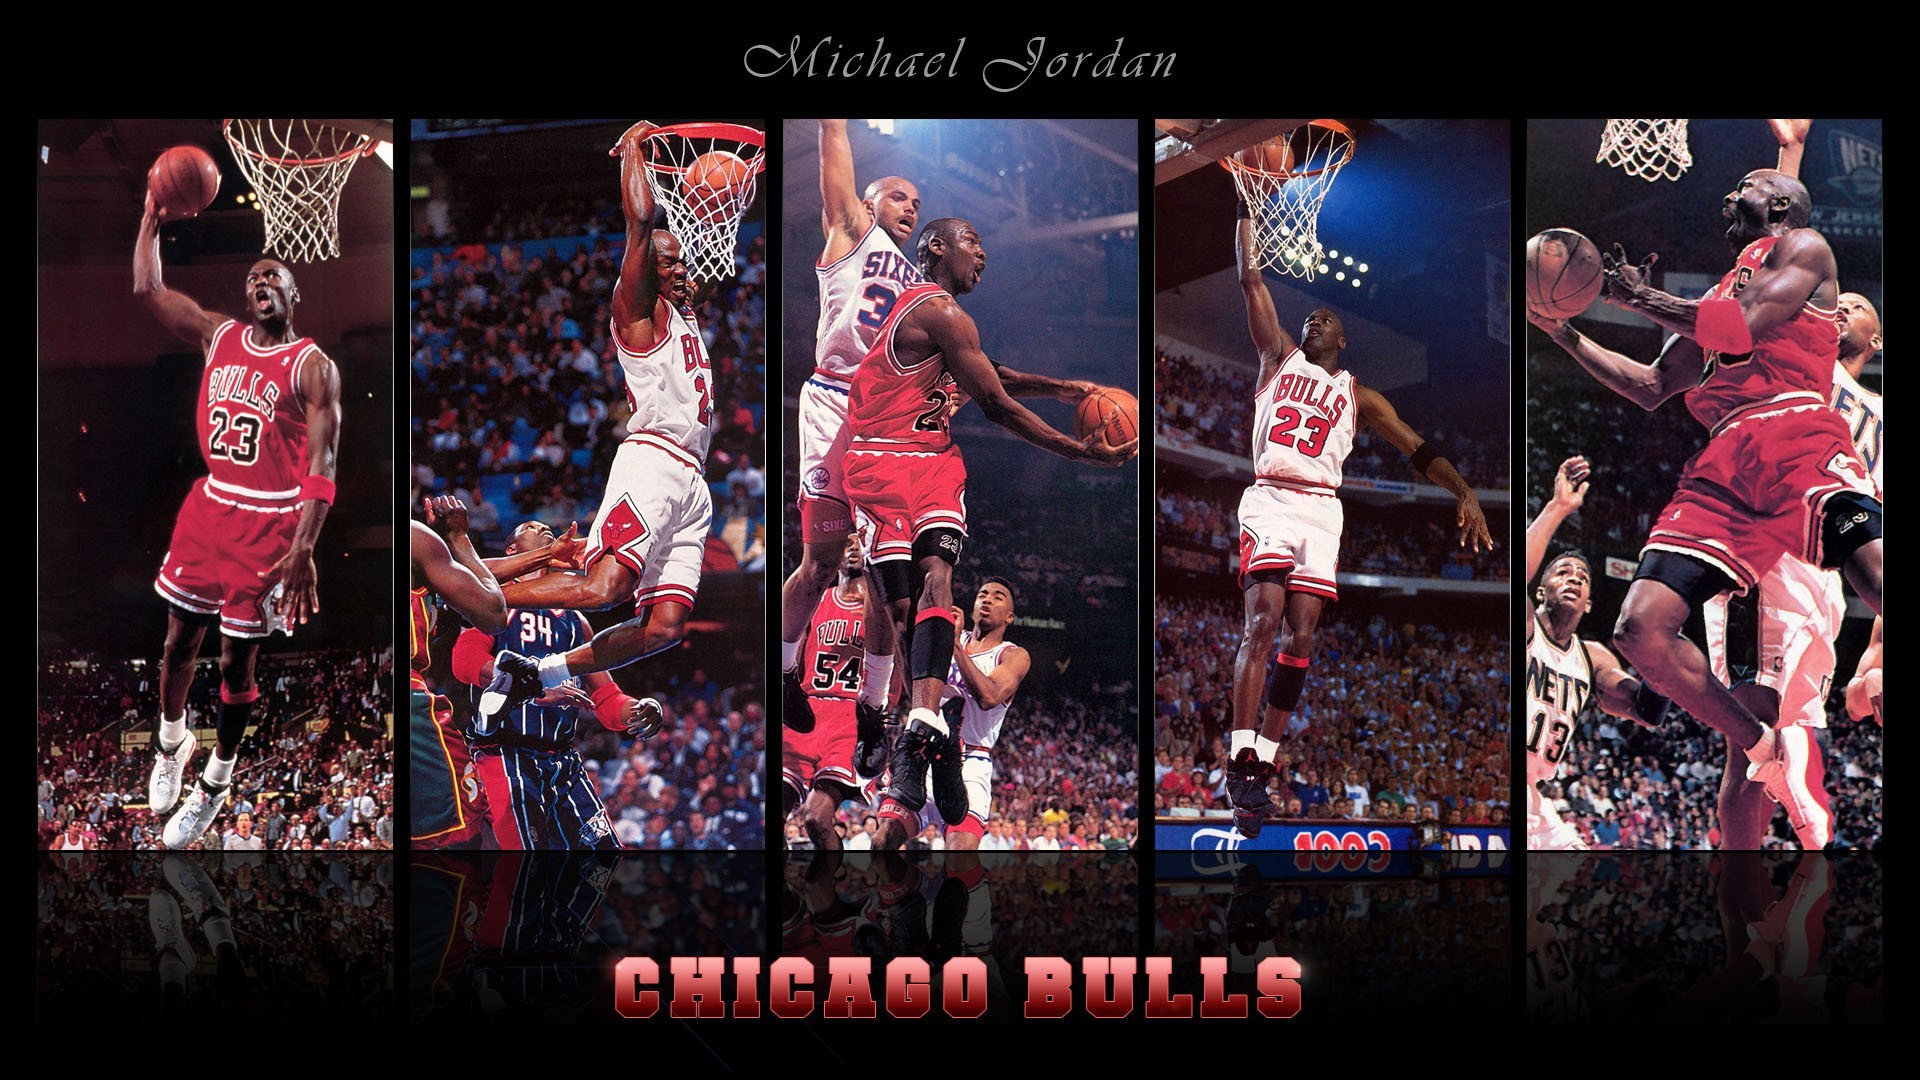 Wallpaper, sports, sport, collage, music, NBA, audience, Michael Jordan, Chciago Bulls, performance, stage, musical theatre, performing arts, basketball moves 1920x1080